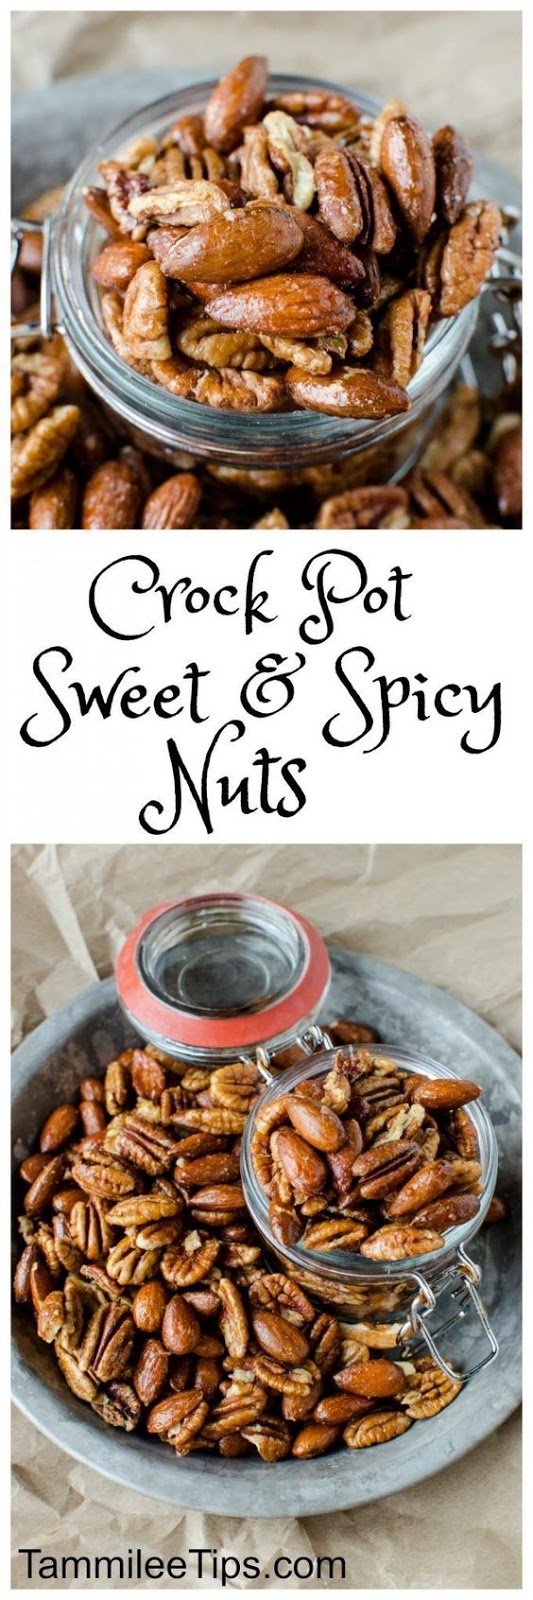 THE MOST SLOW COOKER CROCK POT SWEET AND SPICY NUTS RECIPES